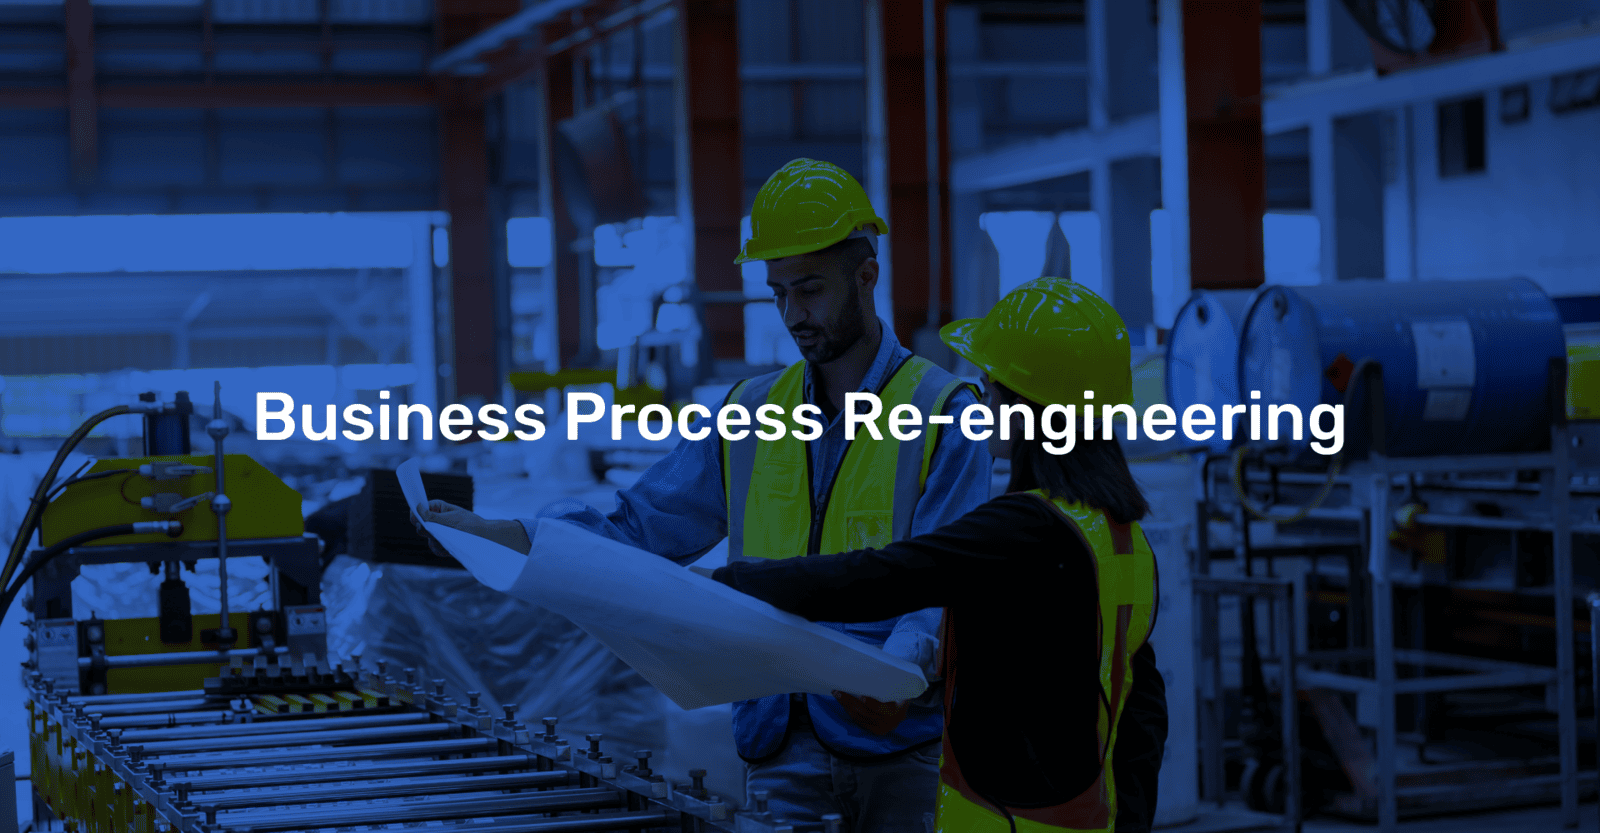 Without streamlining processes, companies rarely get what they expect out of ERP